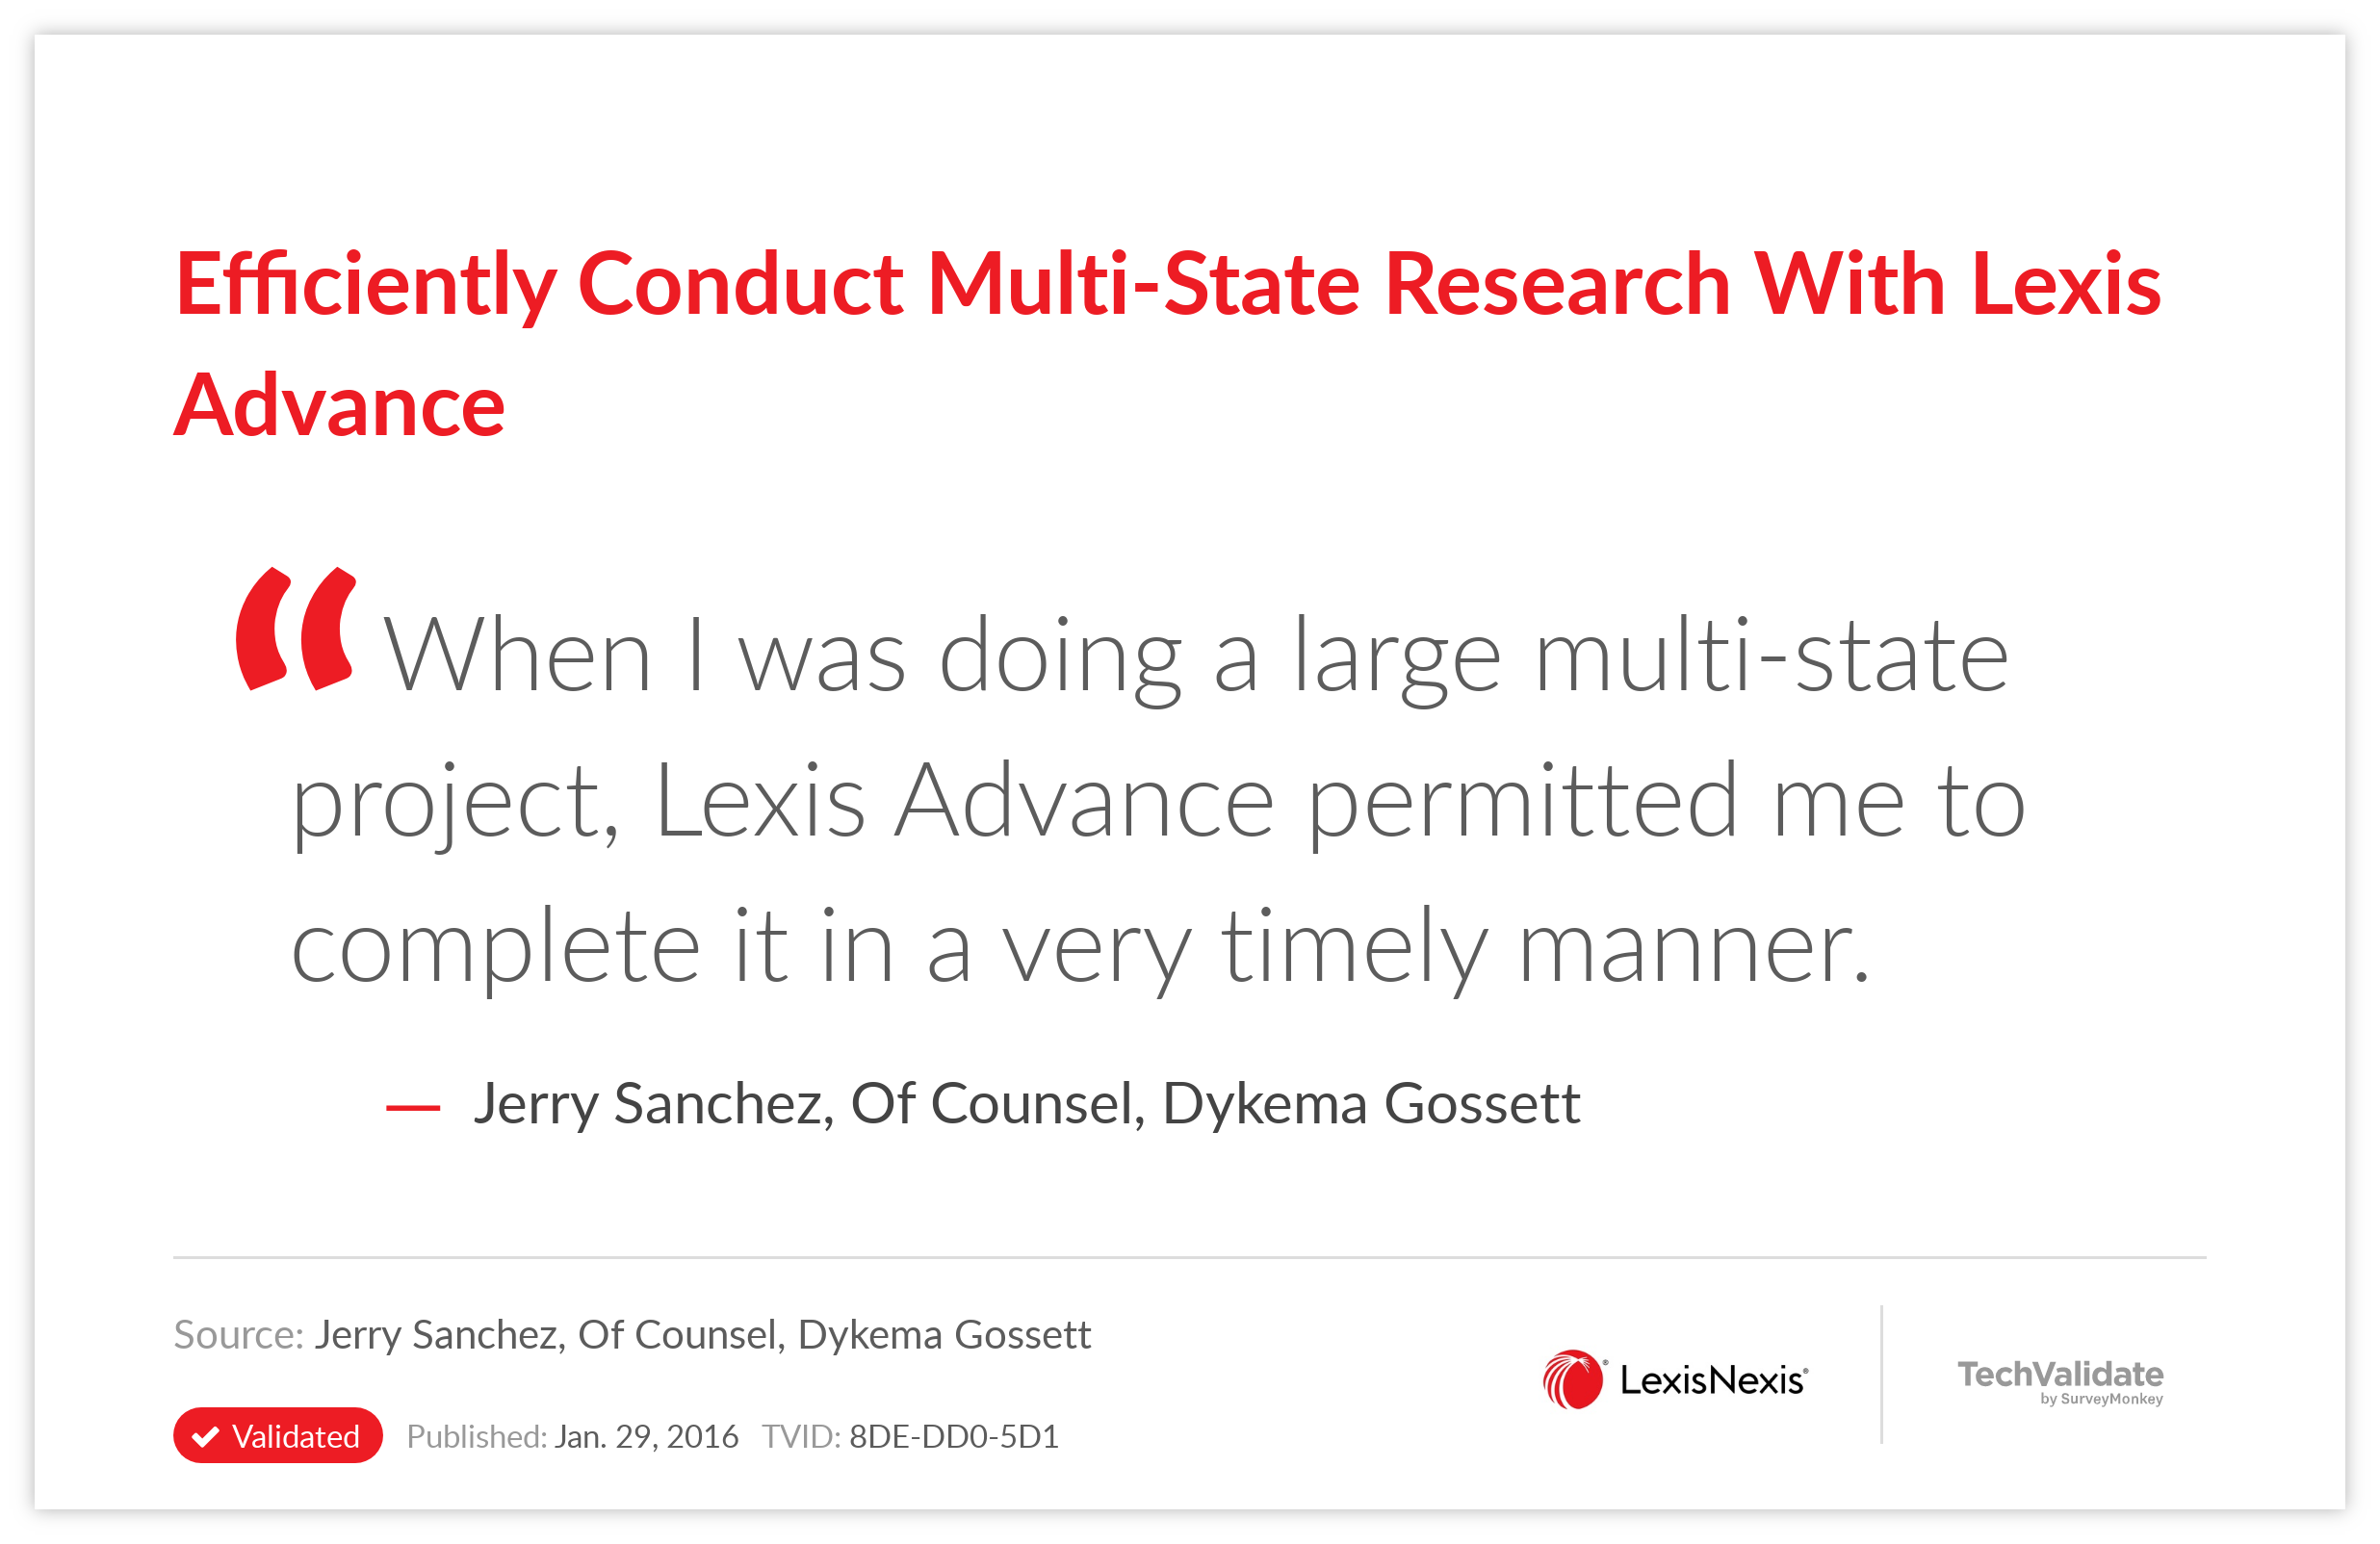 Efficiently Conduct Multi-State Research With Lexis Advance